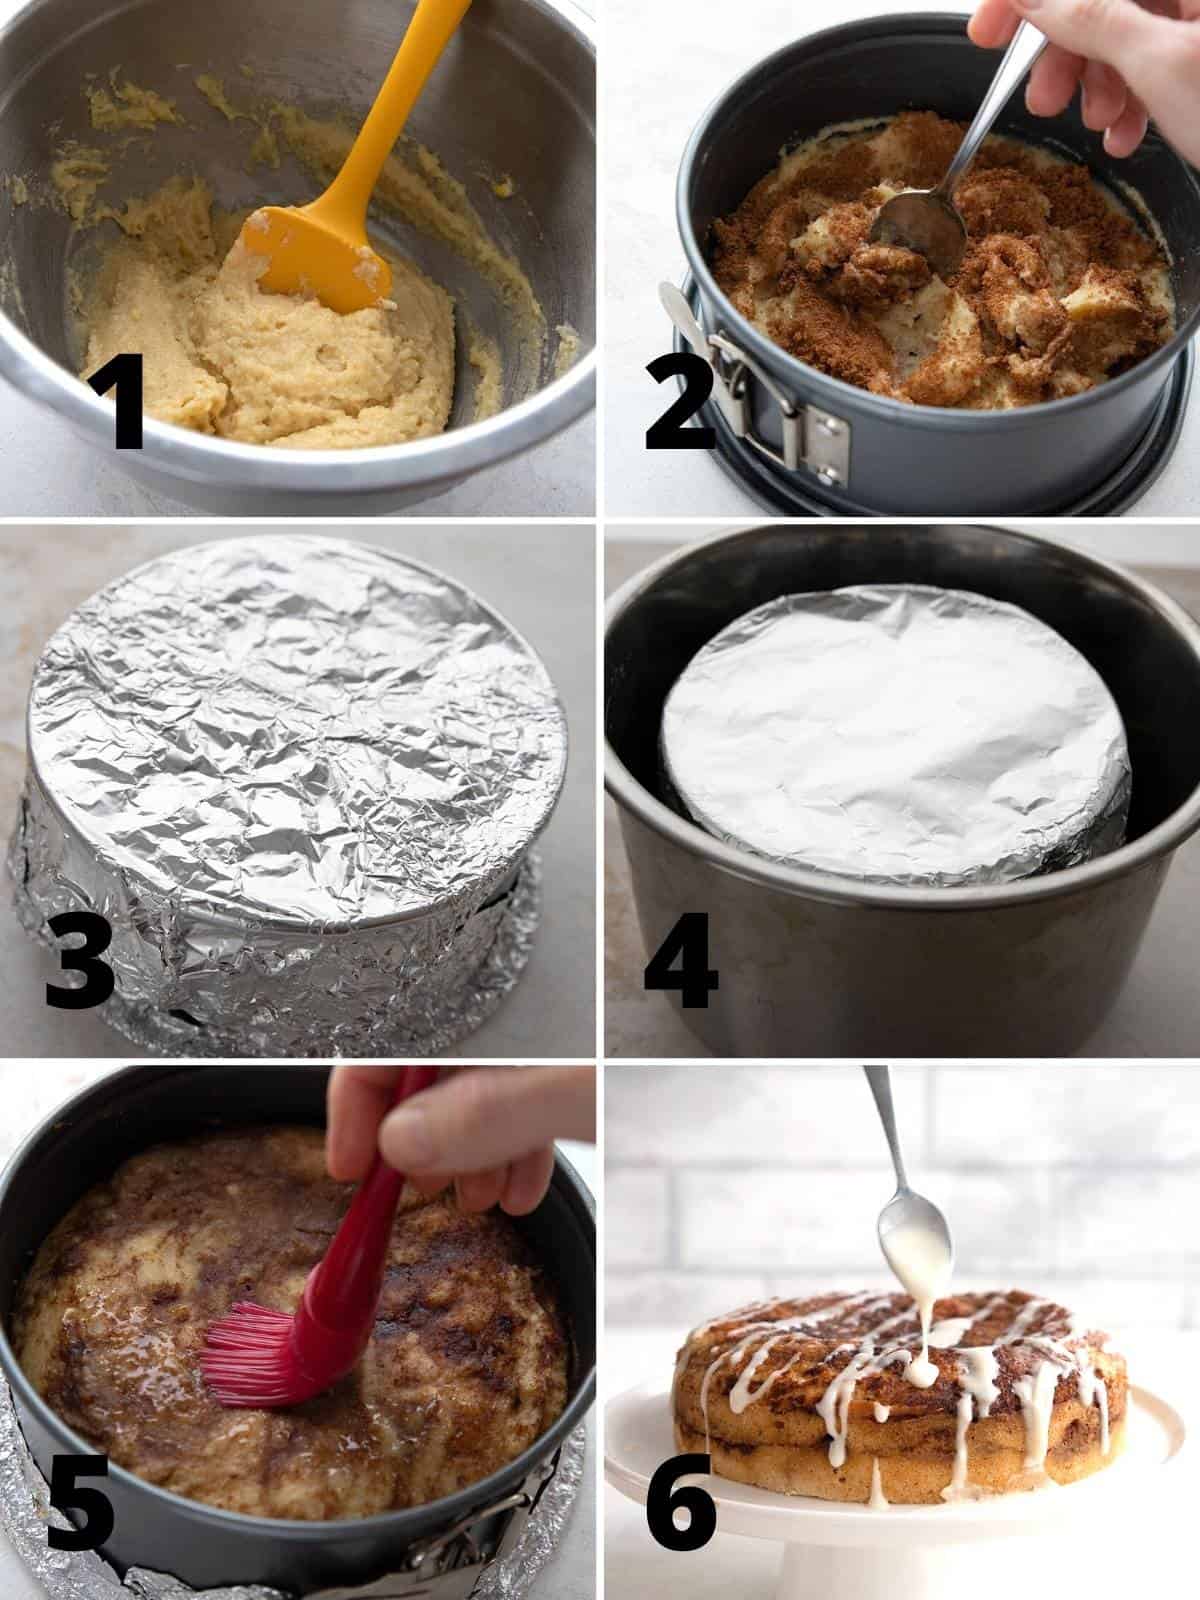 A collage of 6 images showing the steps for making Keto Cinnamon Bread.